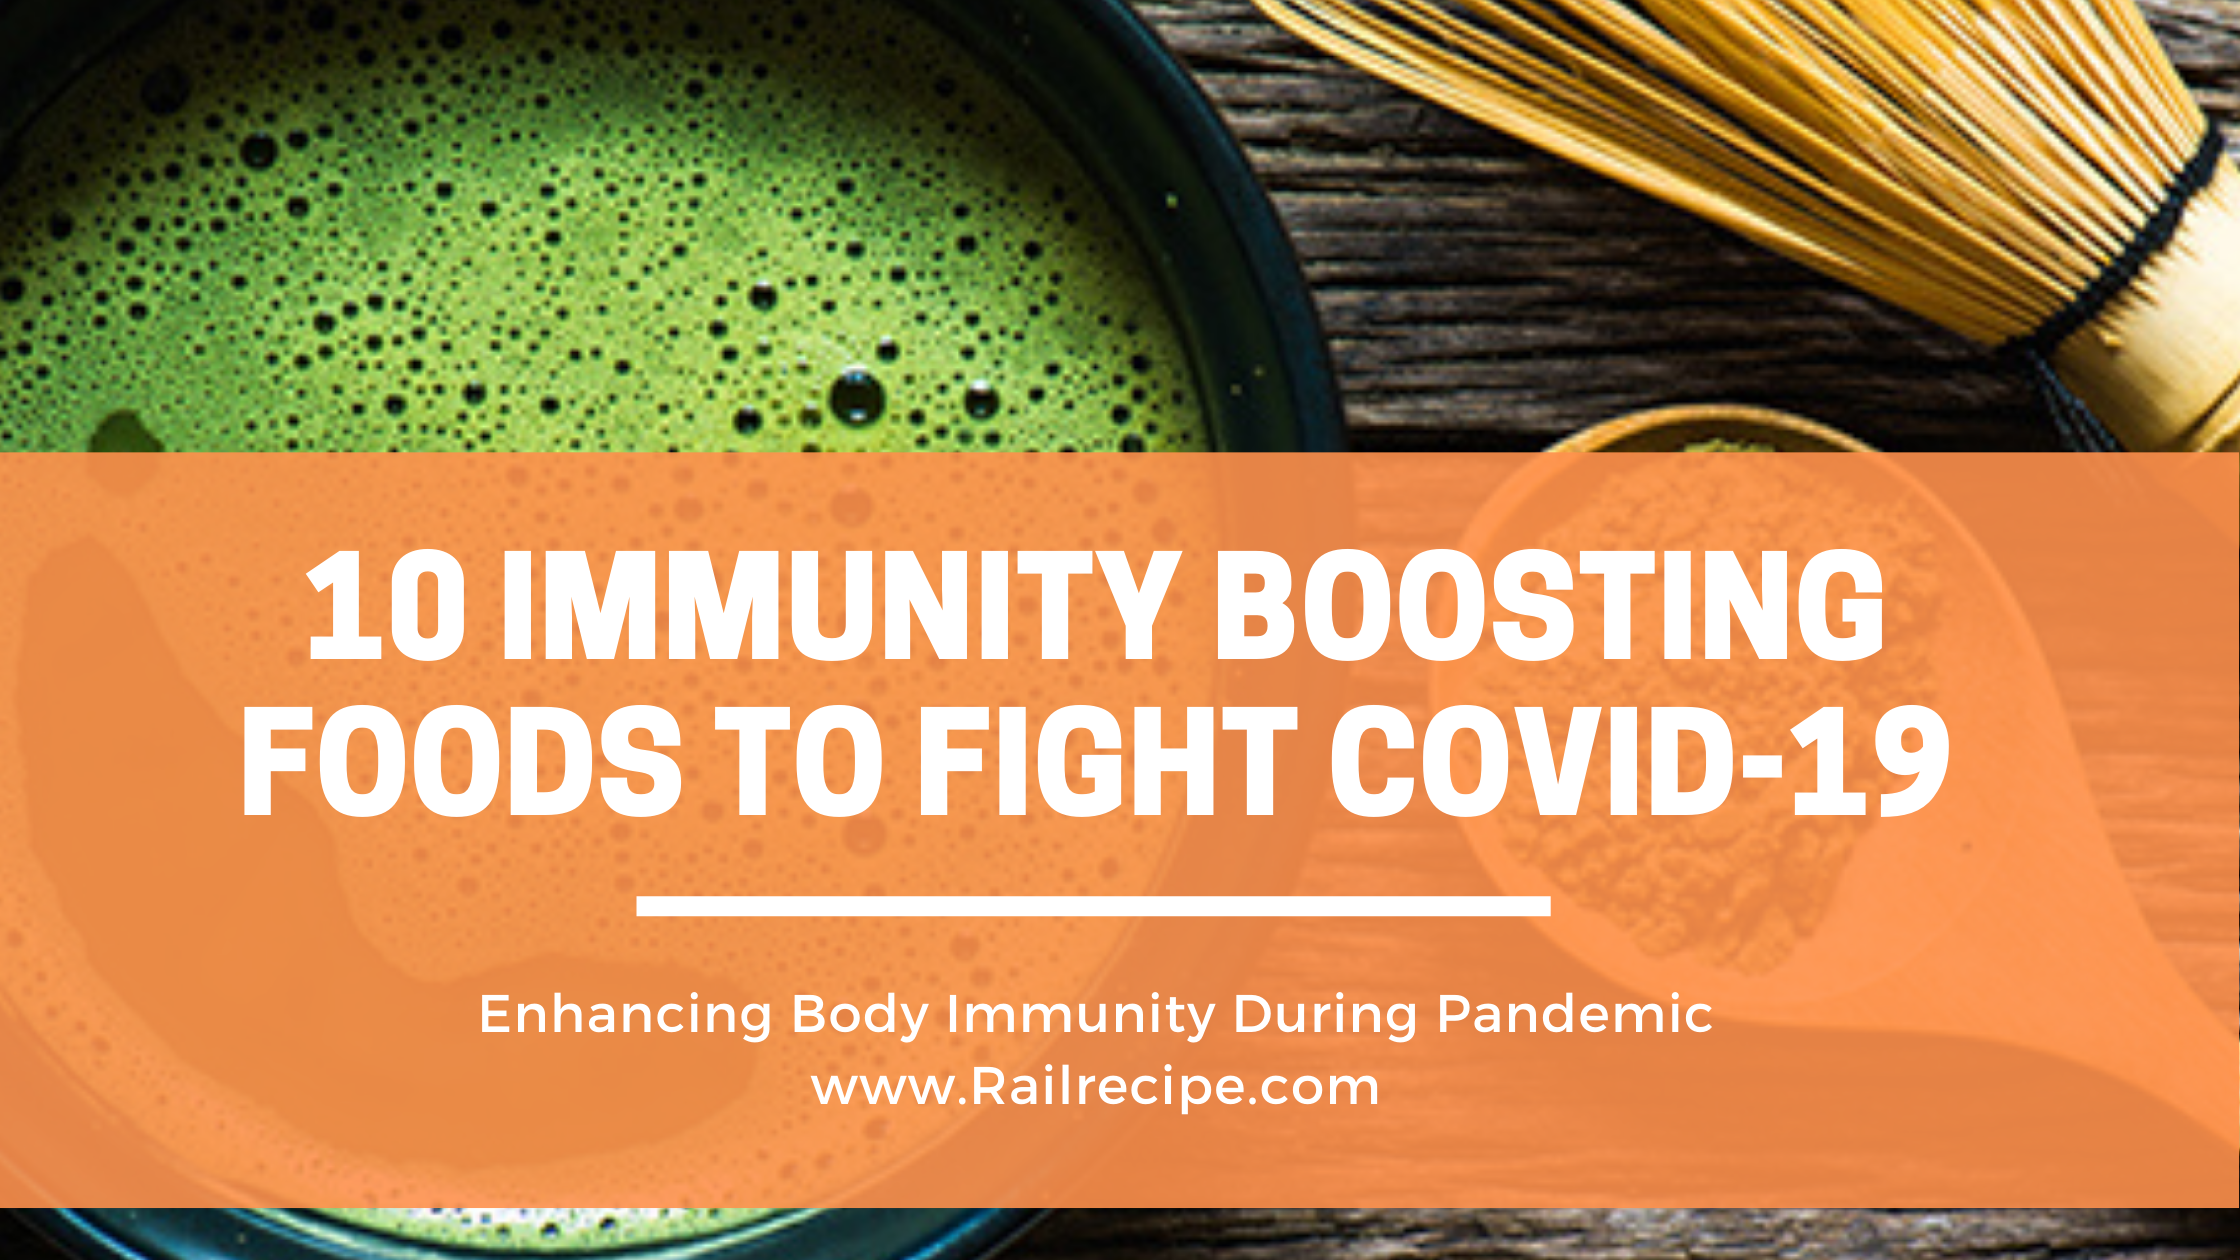 10 Immunity Boosting Foods to Fight COVID-19